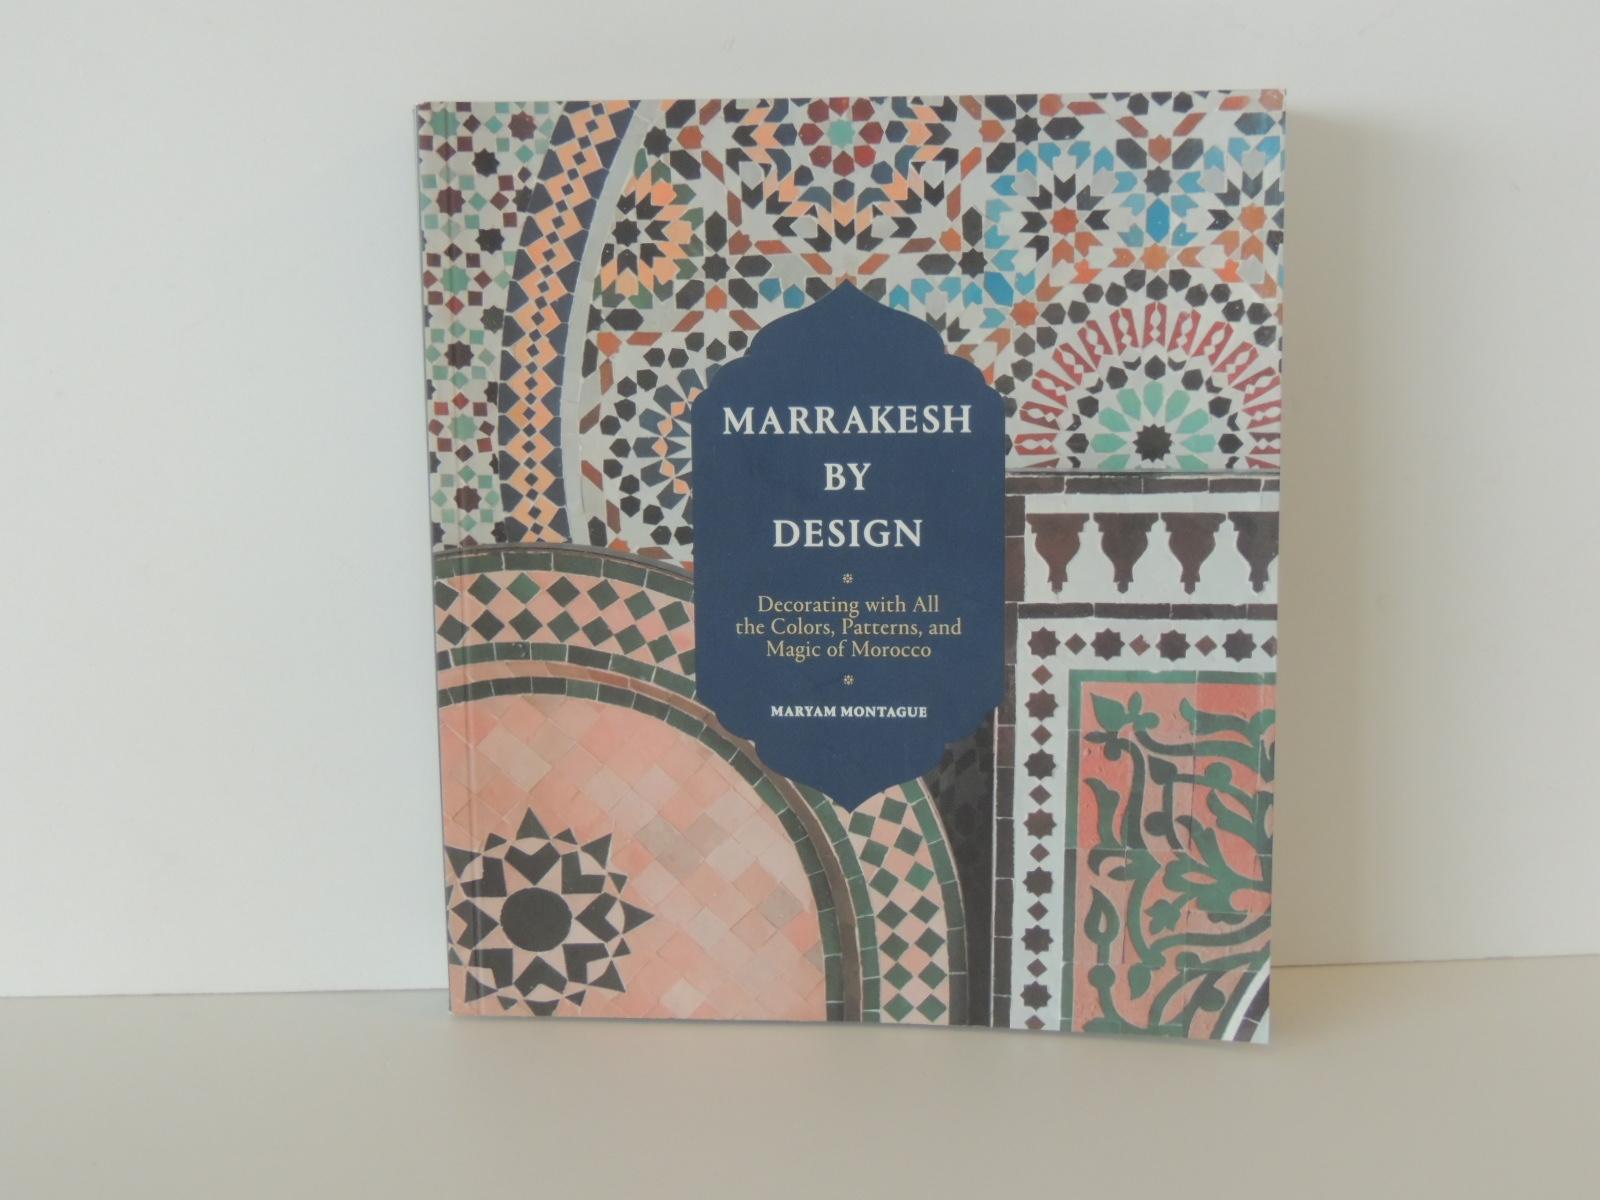 Marrakesh by Design Decorative book
Moroccan design, from the tiled floors to the colored walls, sculpted ceilings, embroidered fabrics, Berber tents, fountains, gardens, and more
In a world filled with beige interiors, Morocco is the perfect